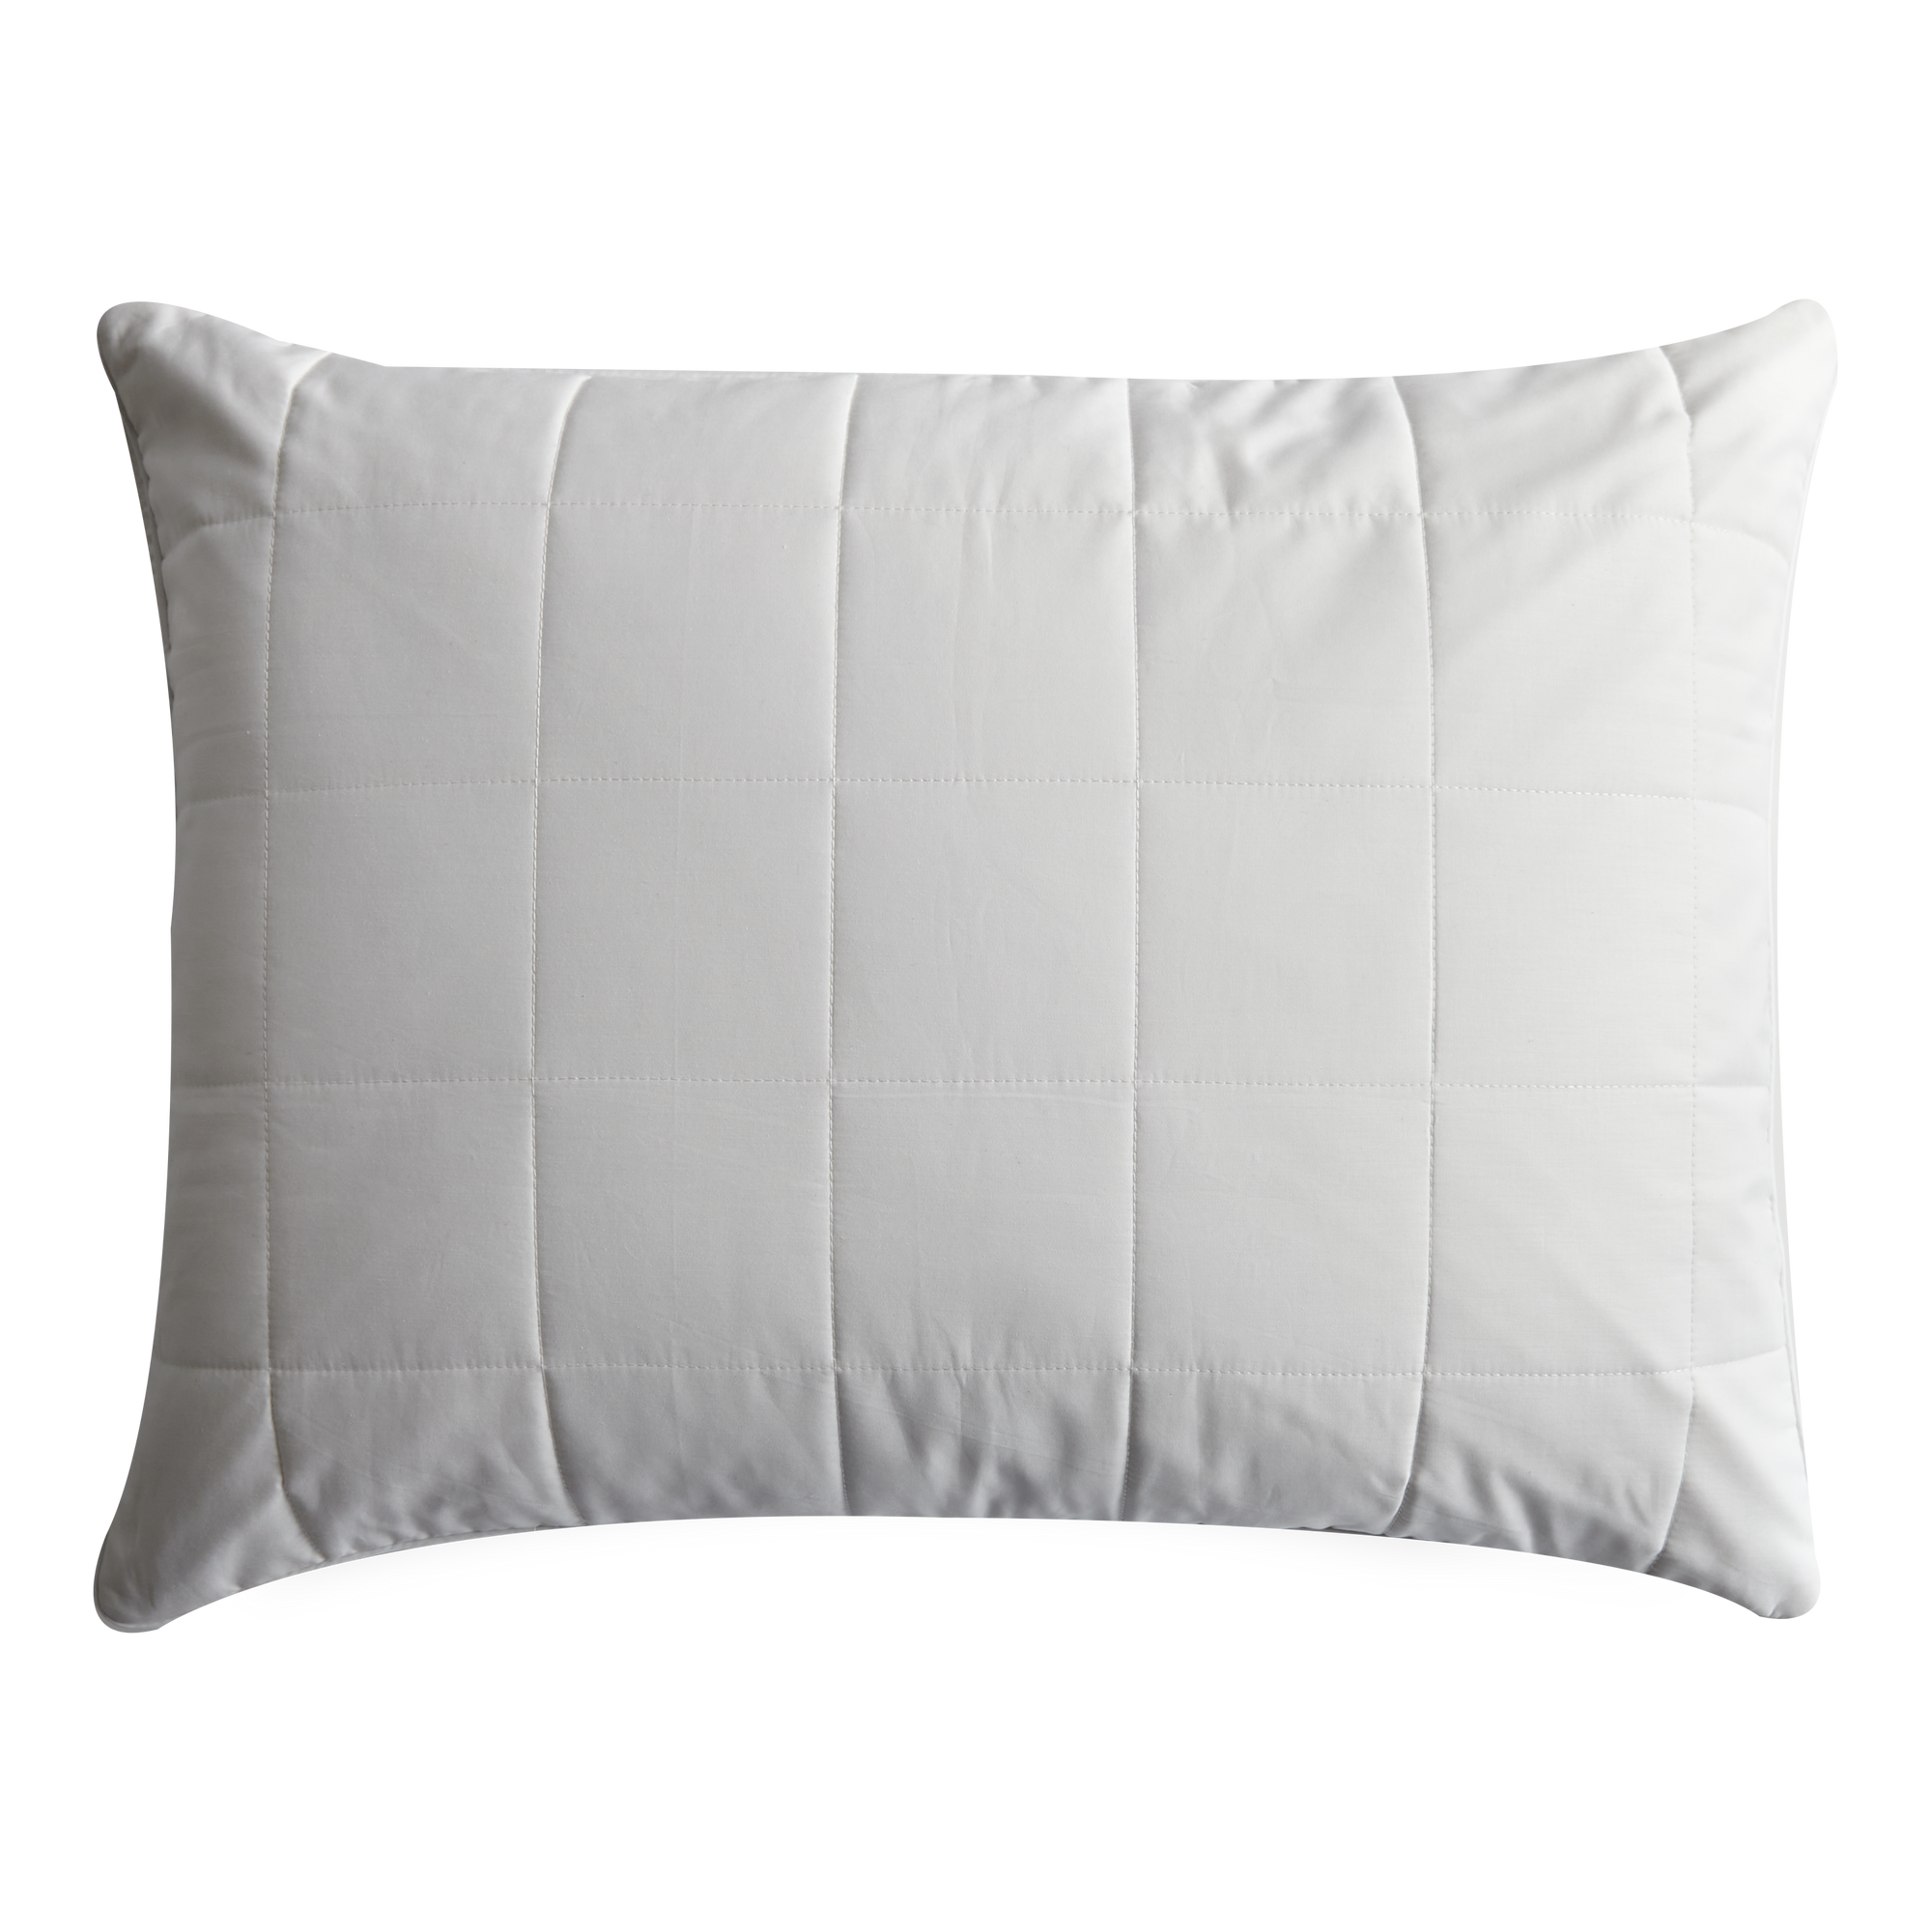 Serving as an additional layer between your pillow and case, our pillow protectors help elongate the life of your pillows.